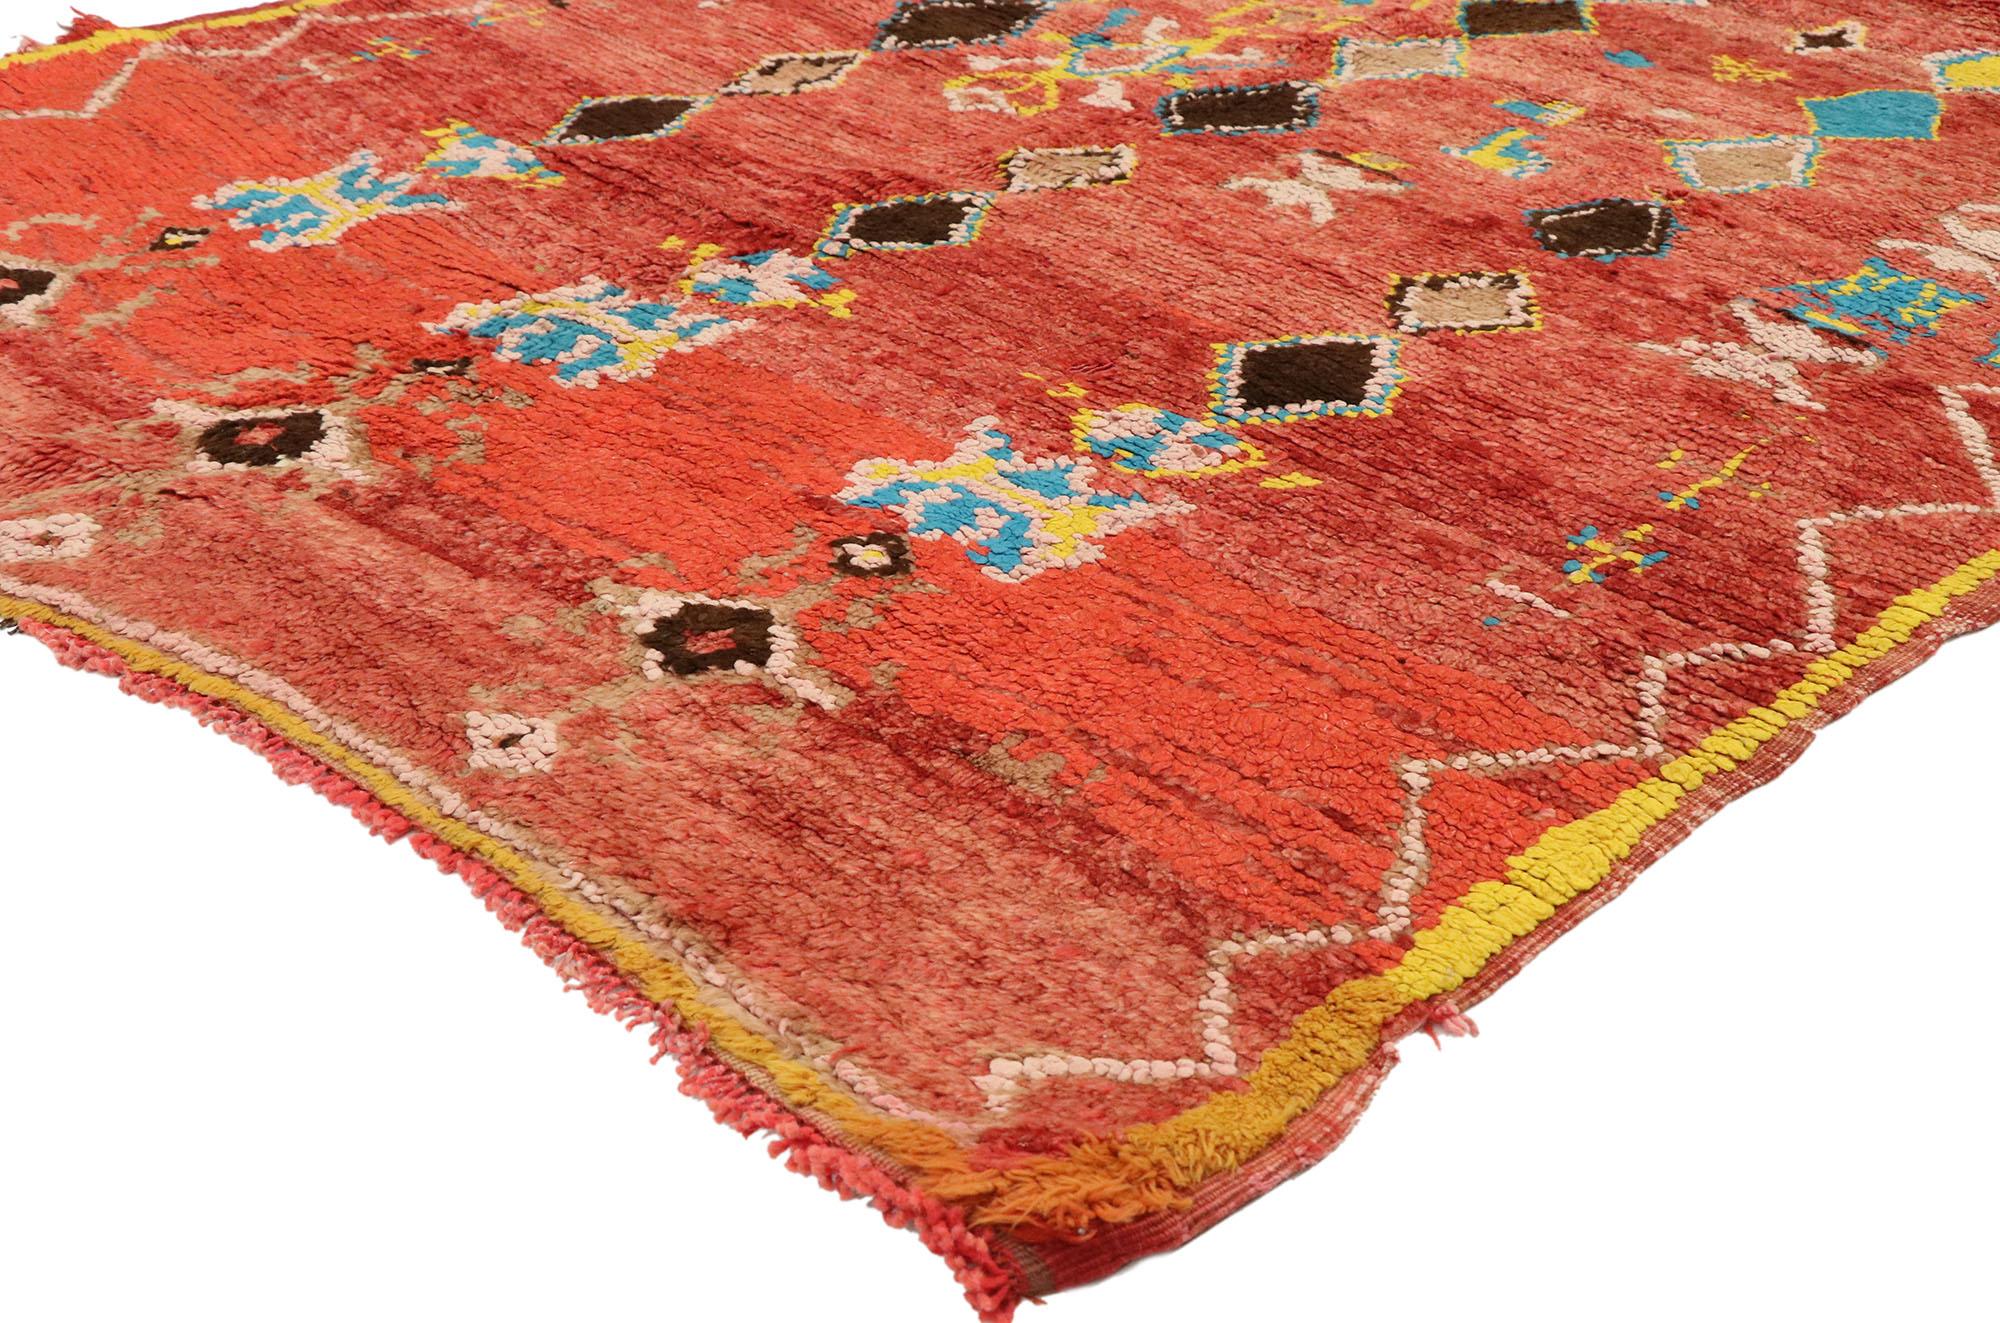 20086, vintage Berber Moroccan rug with Postmodern Tribal style. This hand knotted vintage Moroccan rug features an all-over geometric pattern composed of polychromatic tribal motifs spread across an abrashed red field. Three rows of colorful and